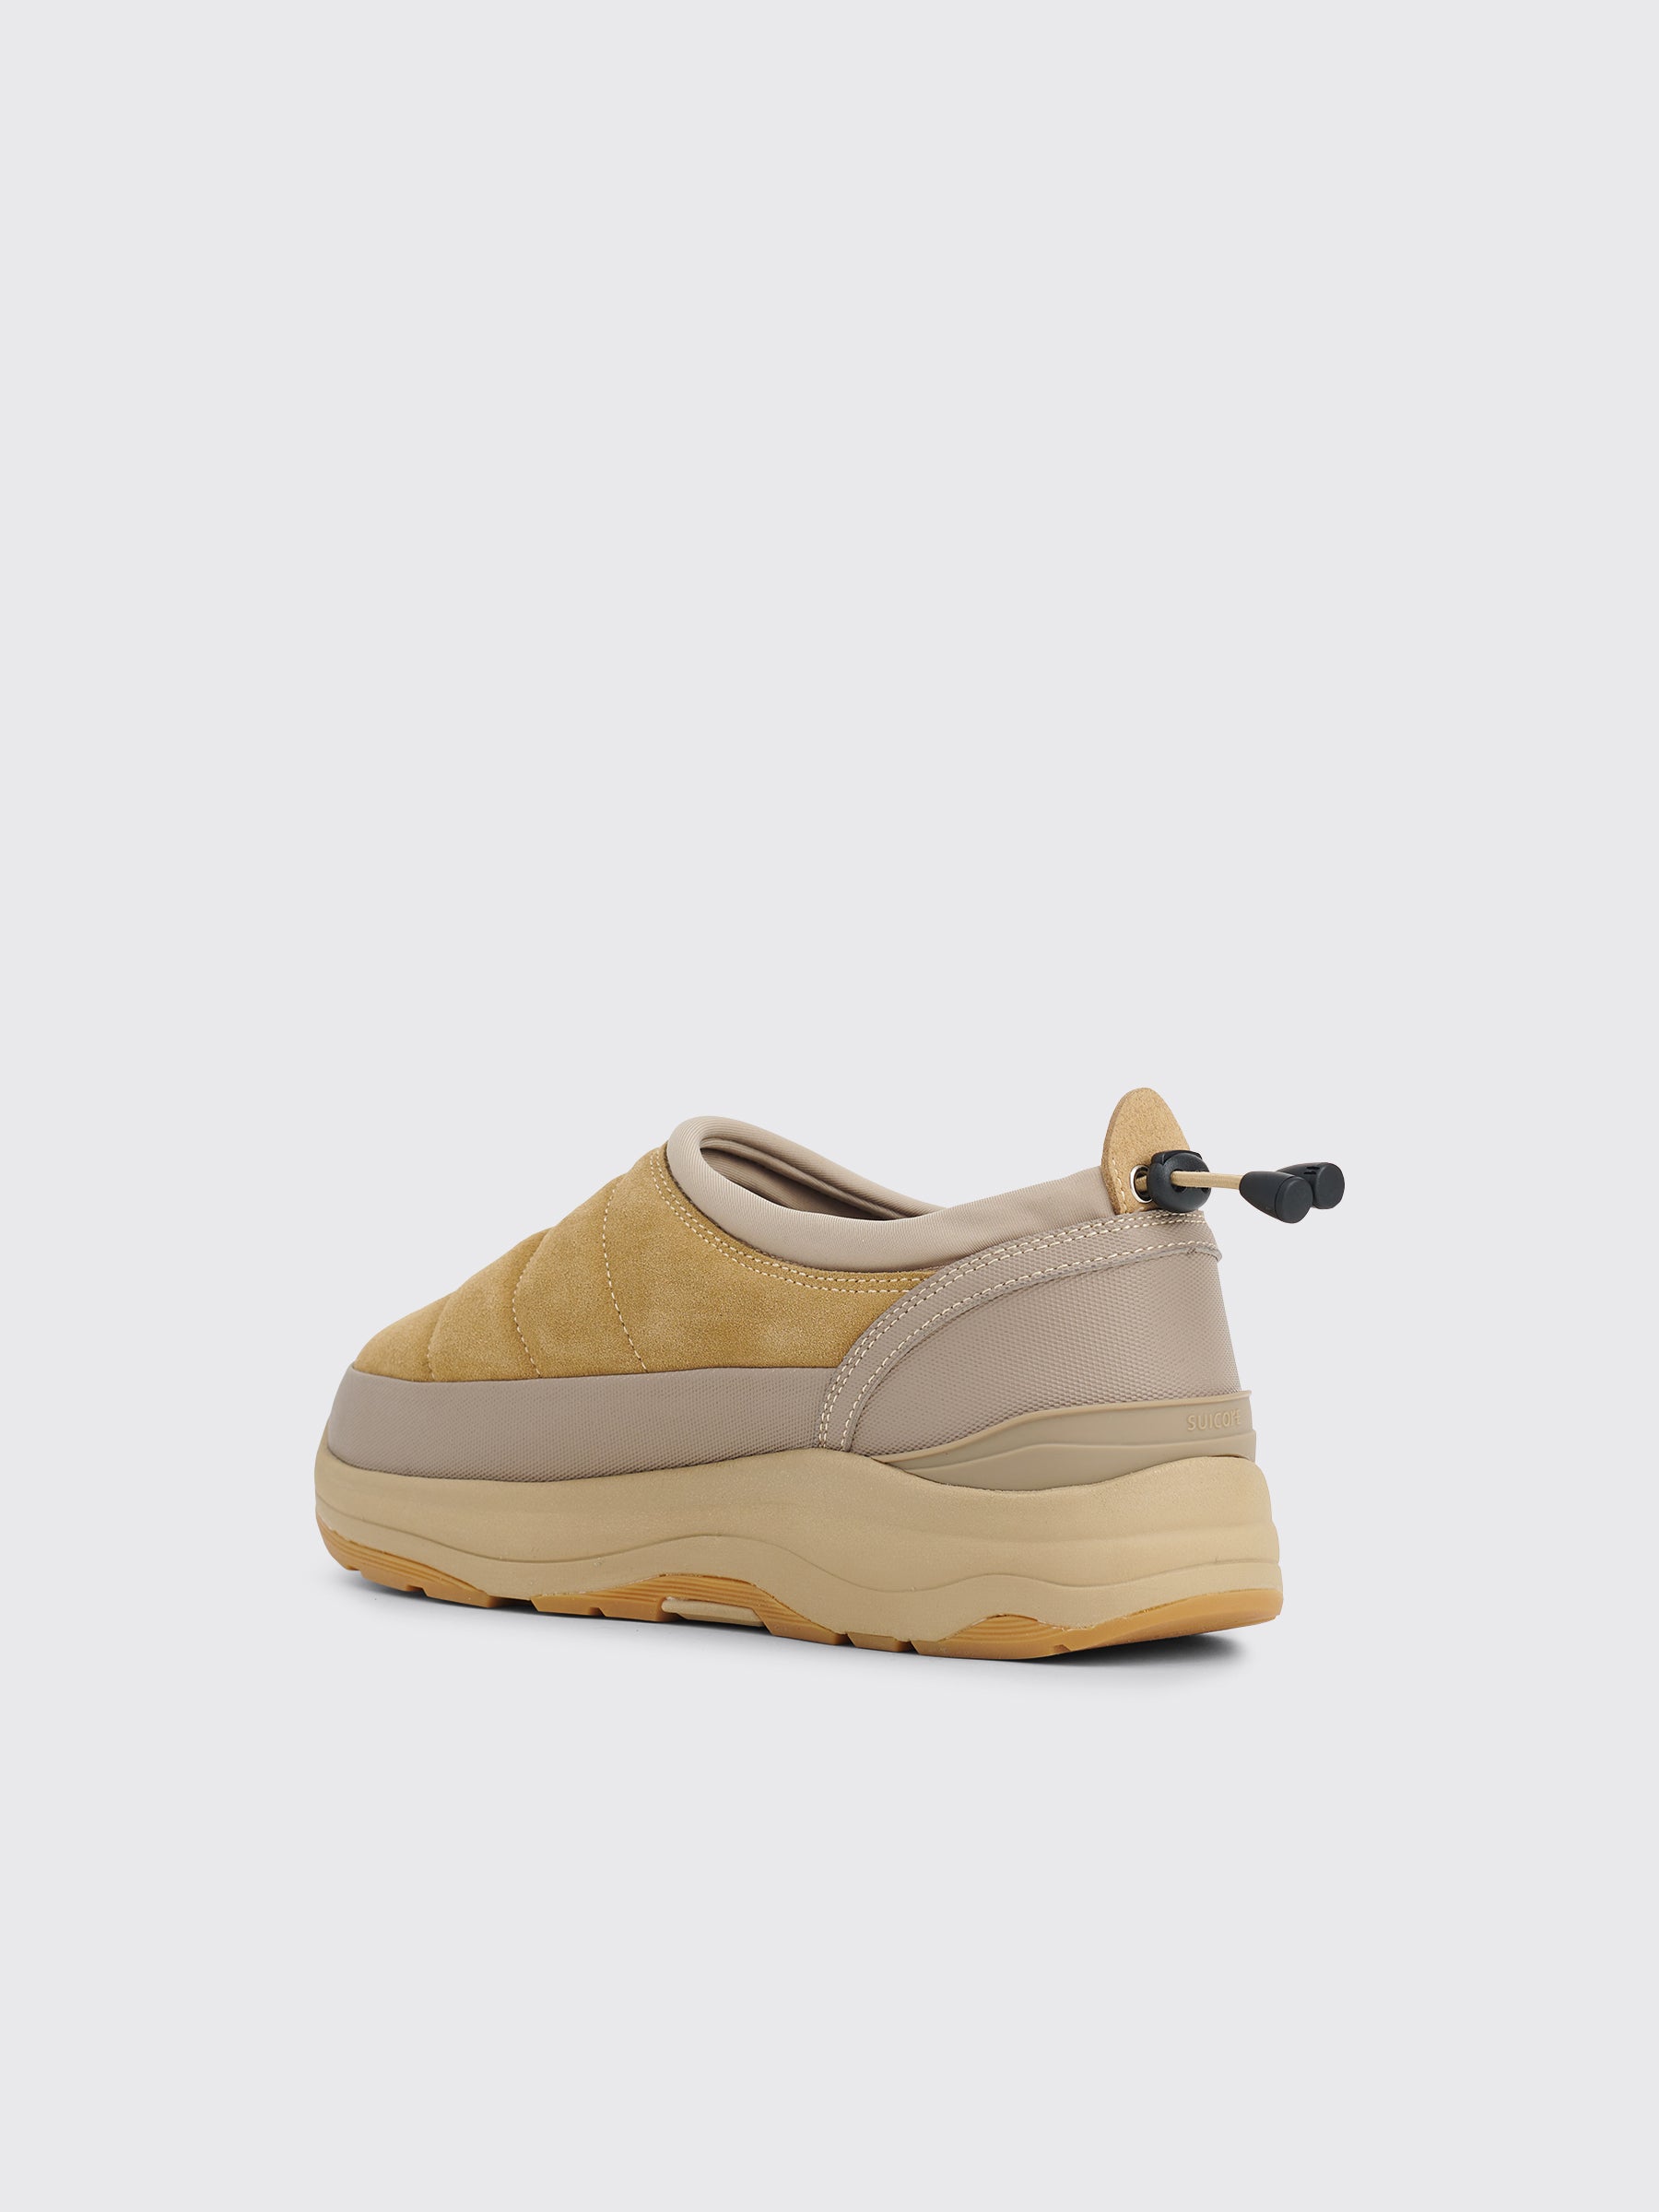 Suicoke x This Is Never That PEPPER-abTNT Beige